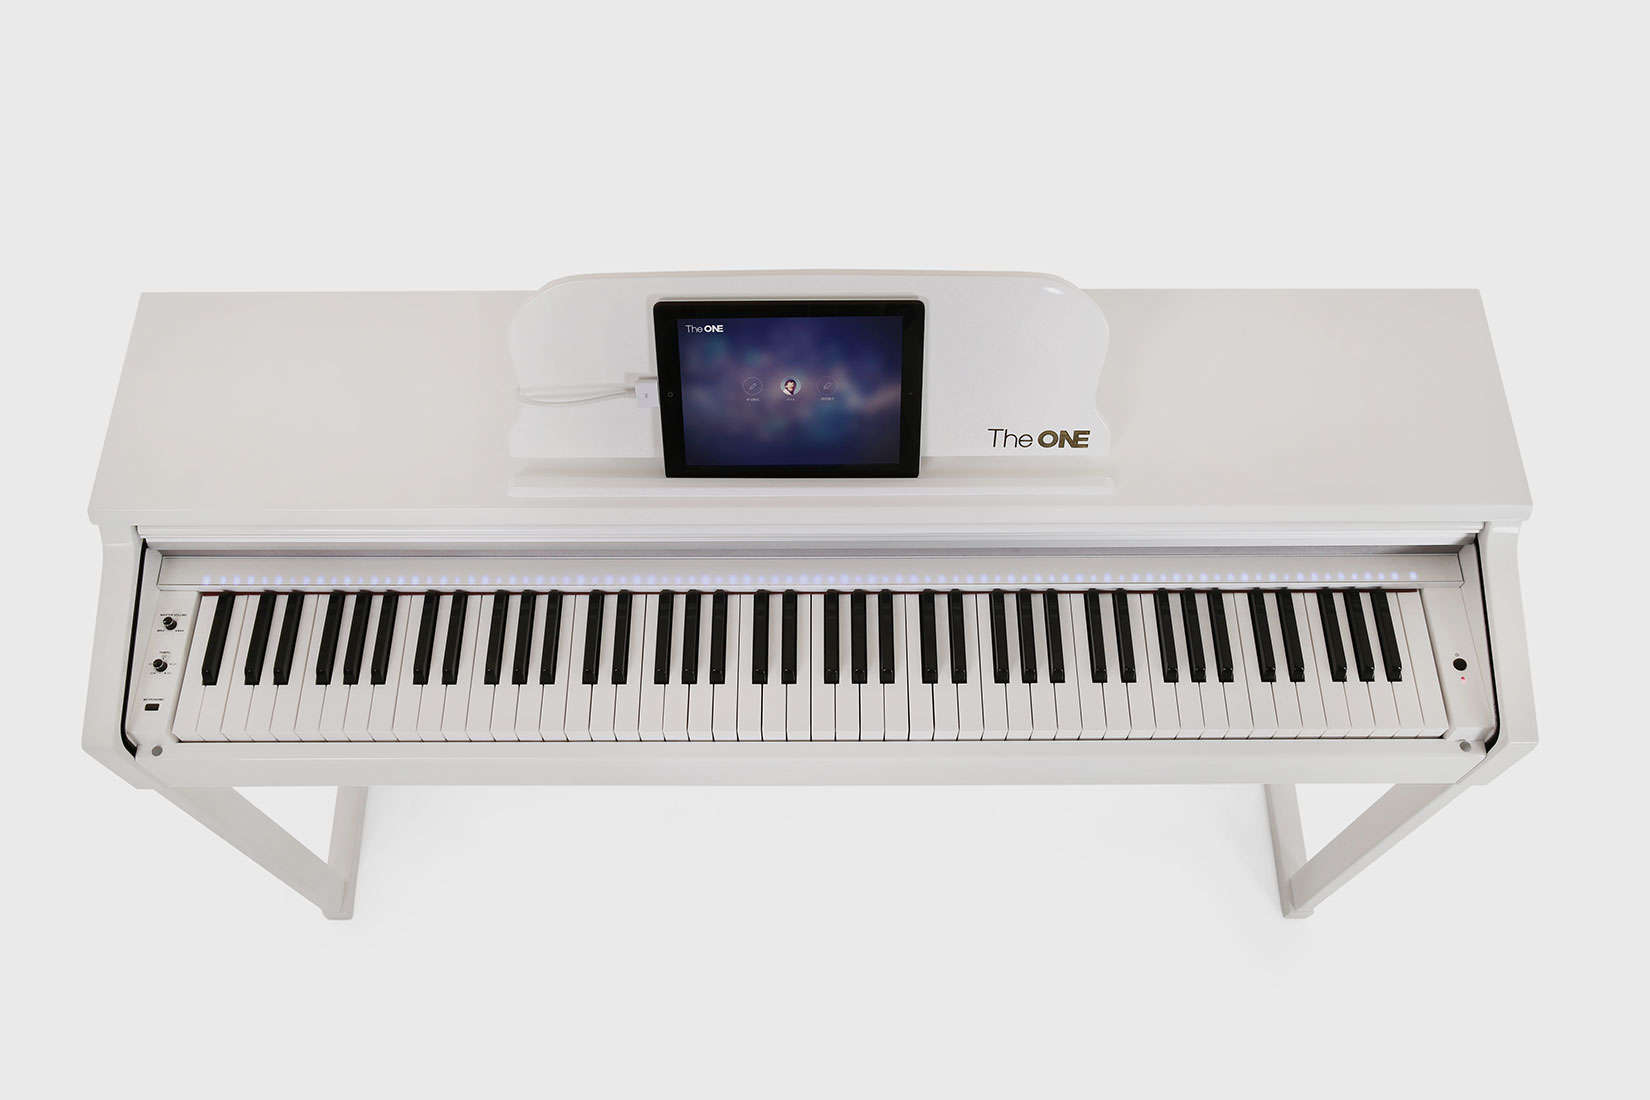 The smart piano also comes in classic white and the company also offers a portable keyboard.